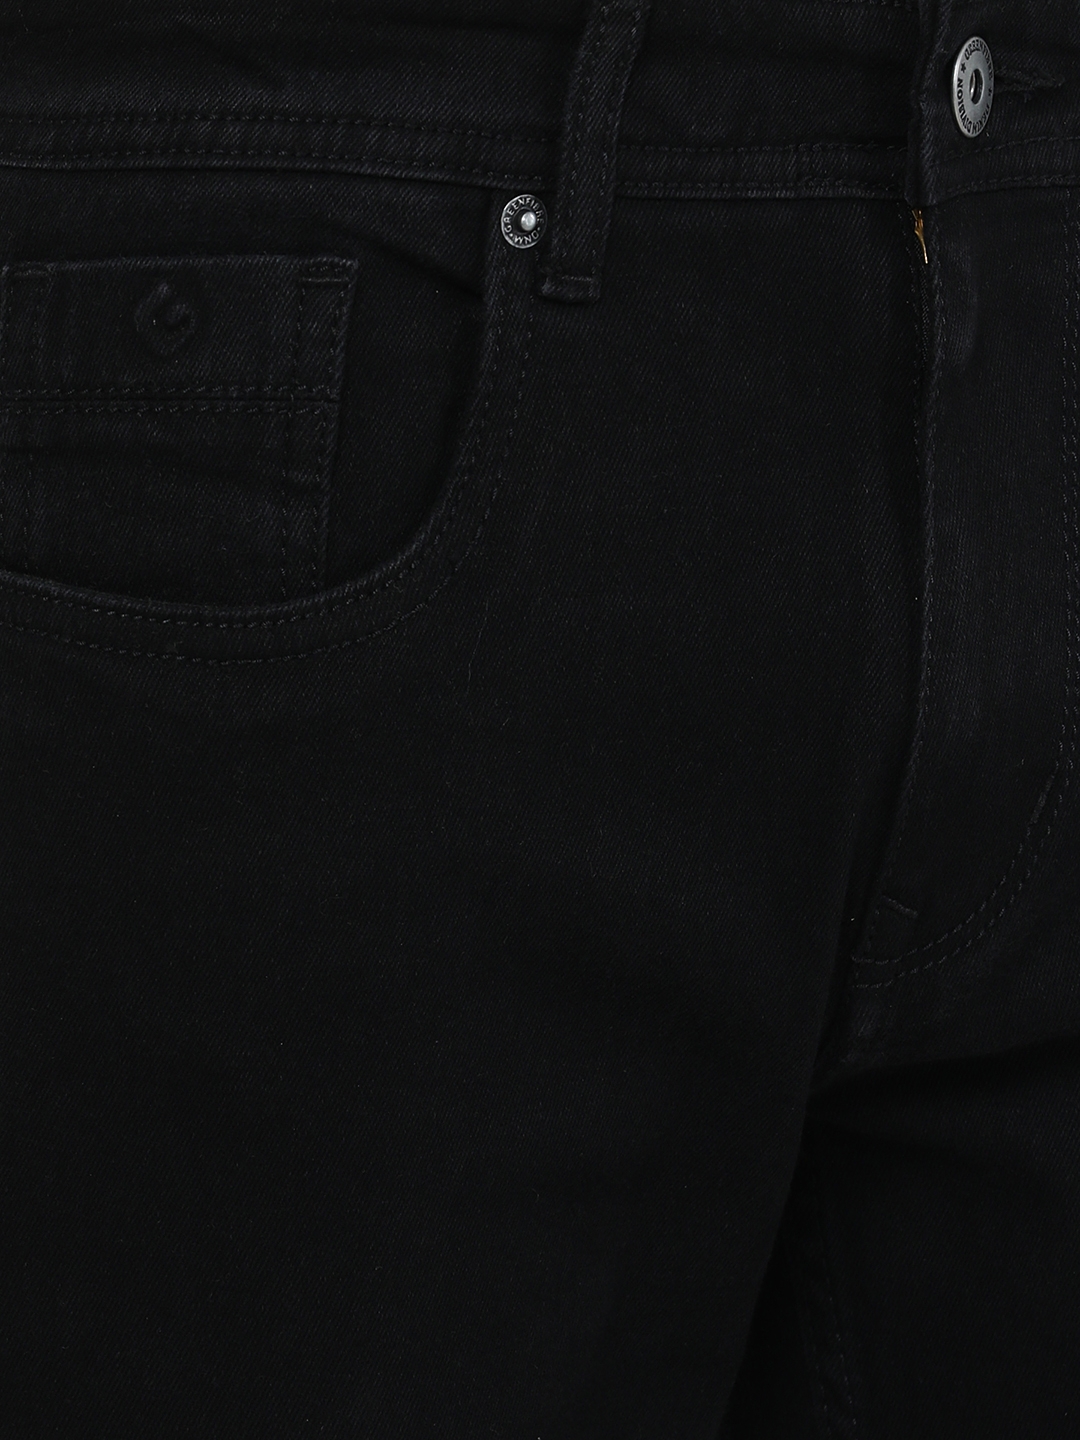 Greenfibre | Jet Black Washed Narrow Fit Jeans | Greenfibre 4